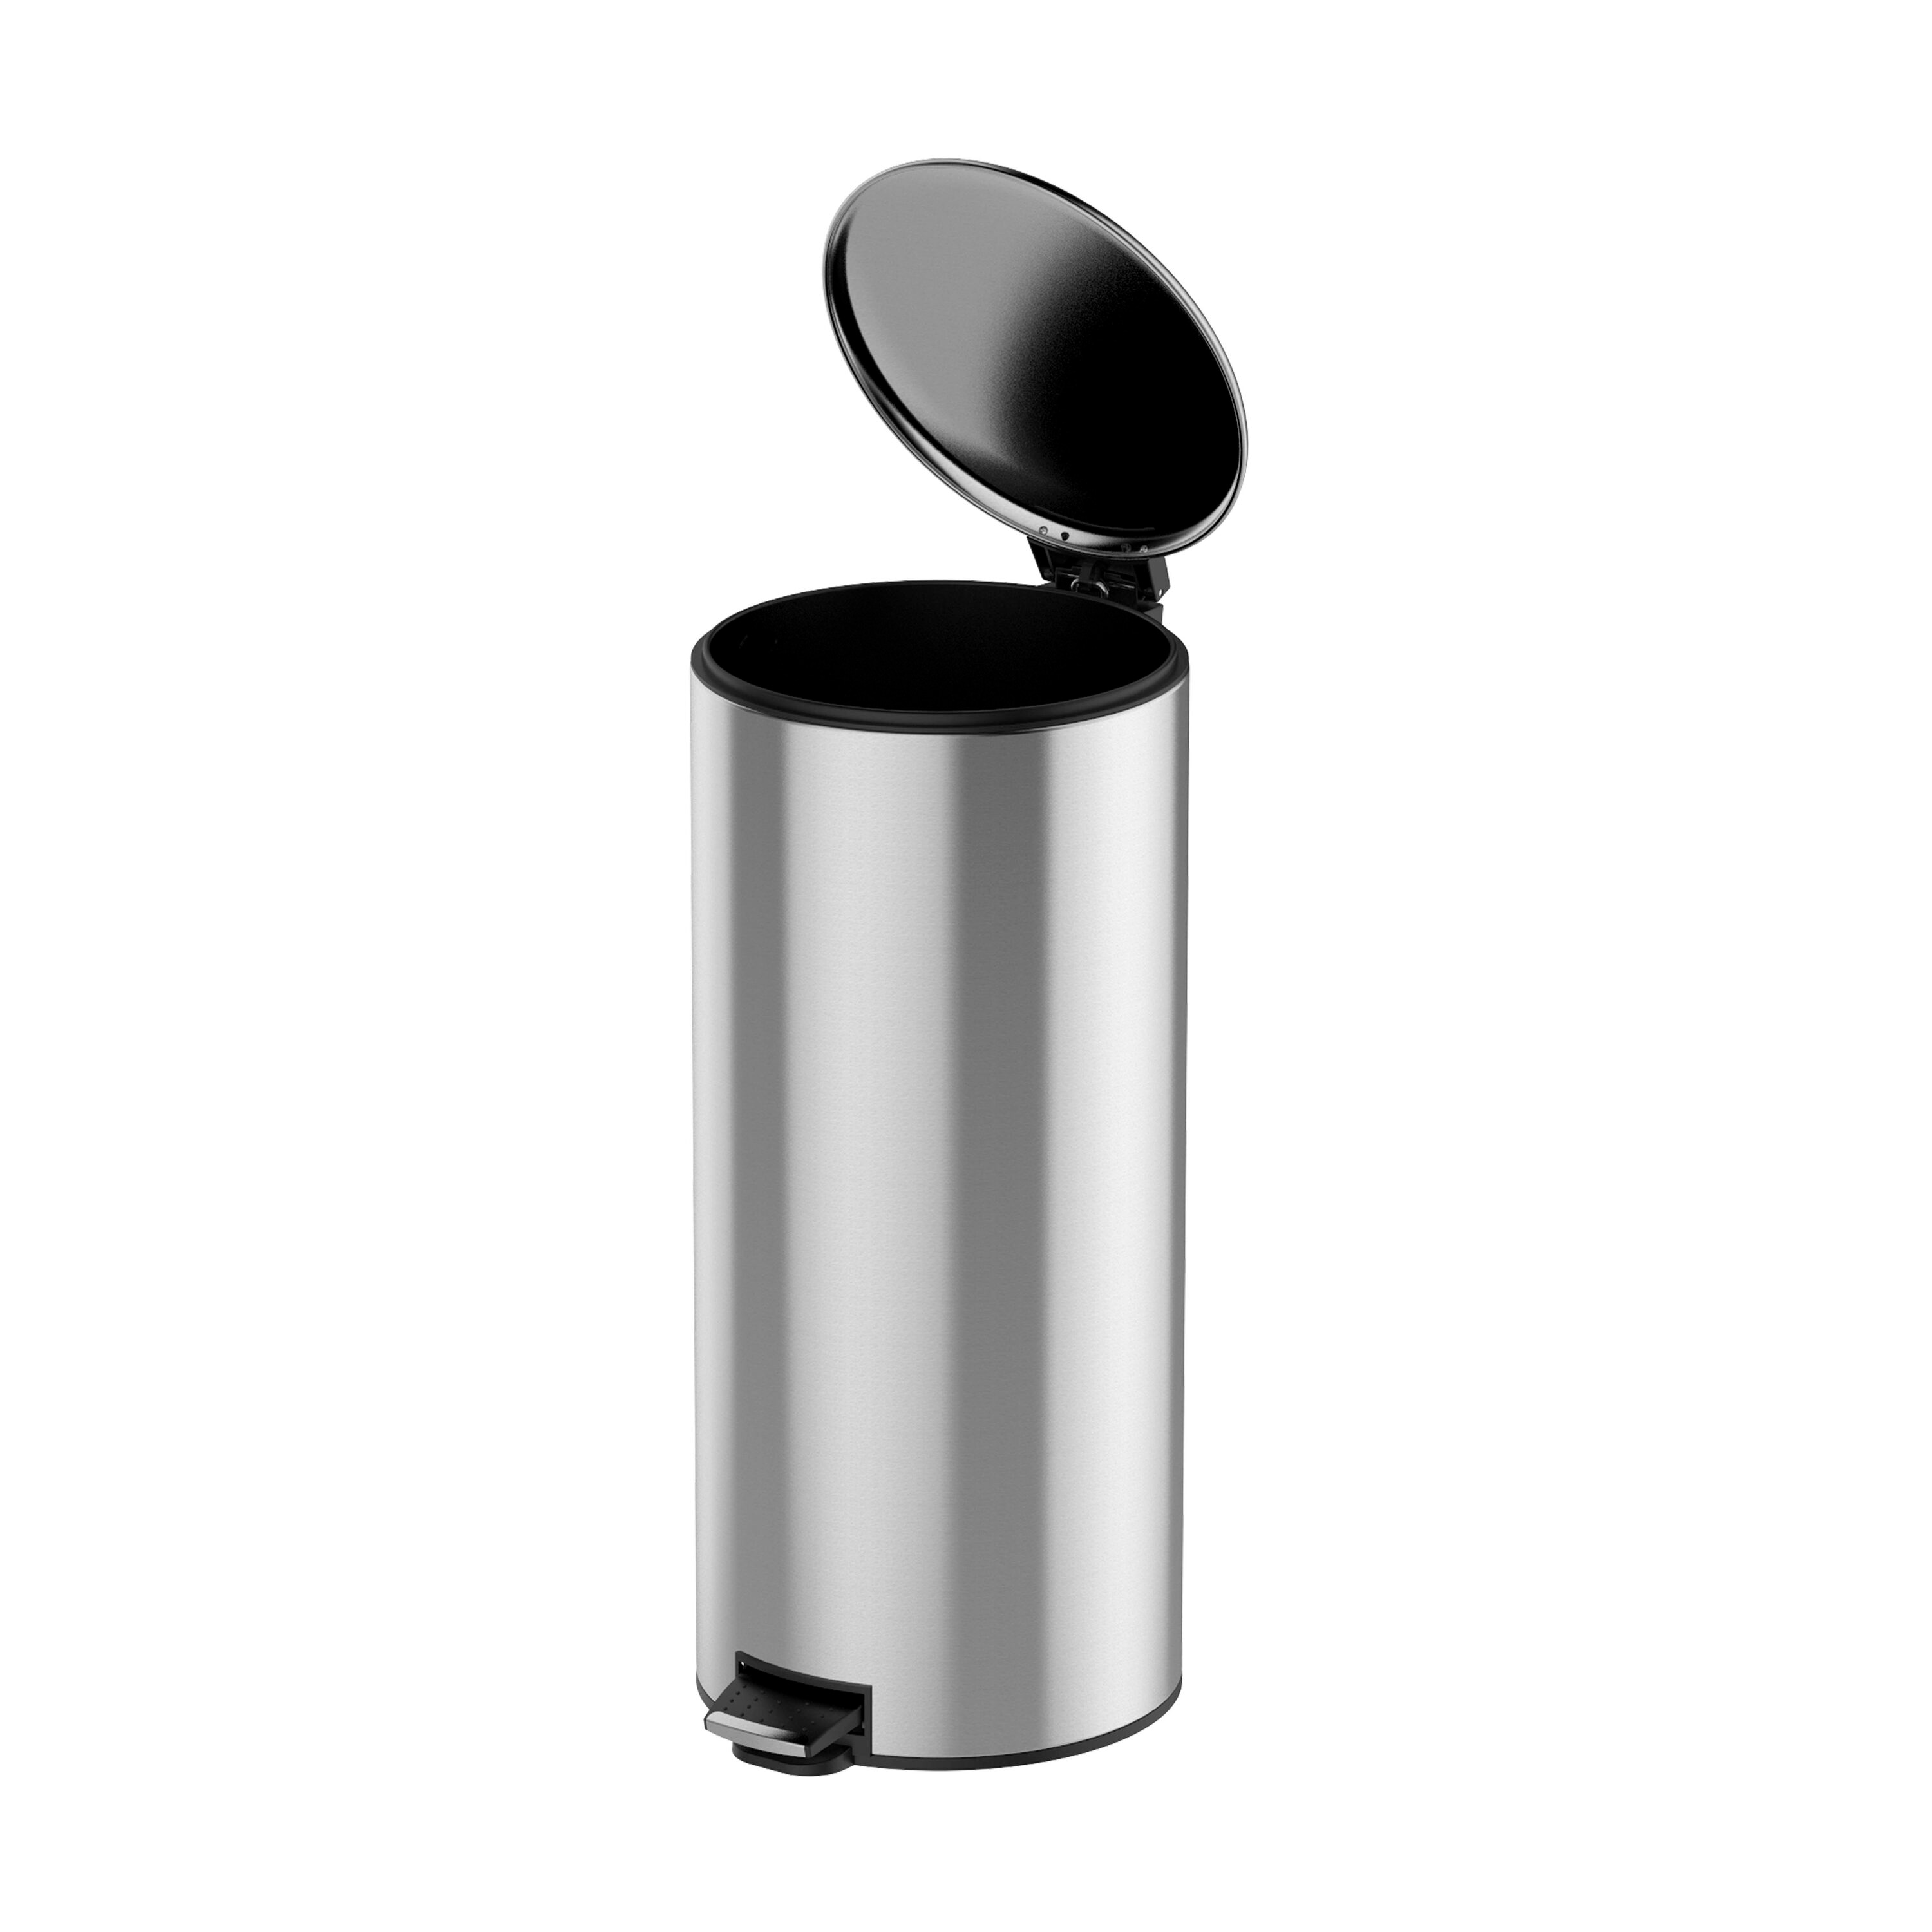 luckxuan Trash Can Kitchen/Garbage Can Stainless Steel Trash Can，7.7-Gallon  Kitchen Trash, 30 Inch Tall Garbage Can for Indoor, Outdoor or Commercial